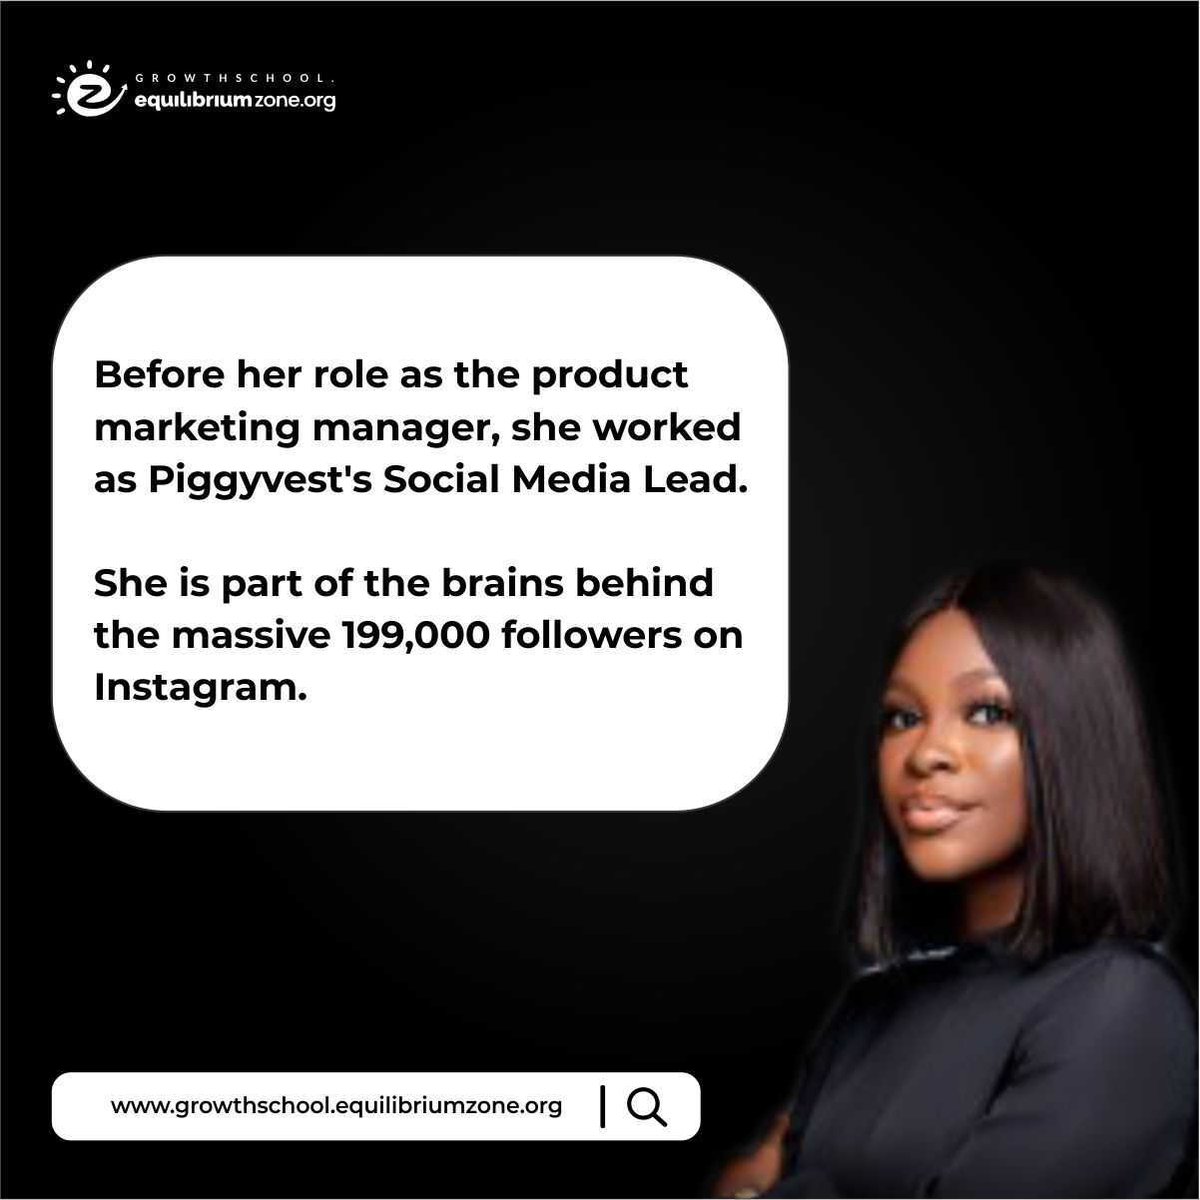 Presenting our #EZGrowthSchool Growth Leader of the Week 

None other than Peace Obinani, the Product Marketing Manager at Piggyvest 

#EZGrowthSchool #womenintech #growthleader